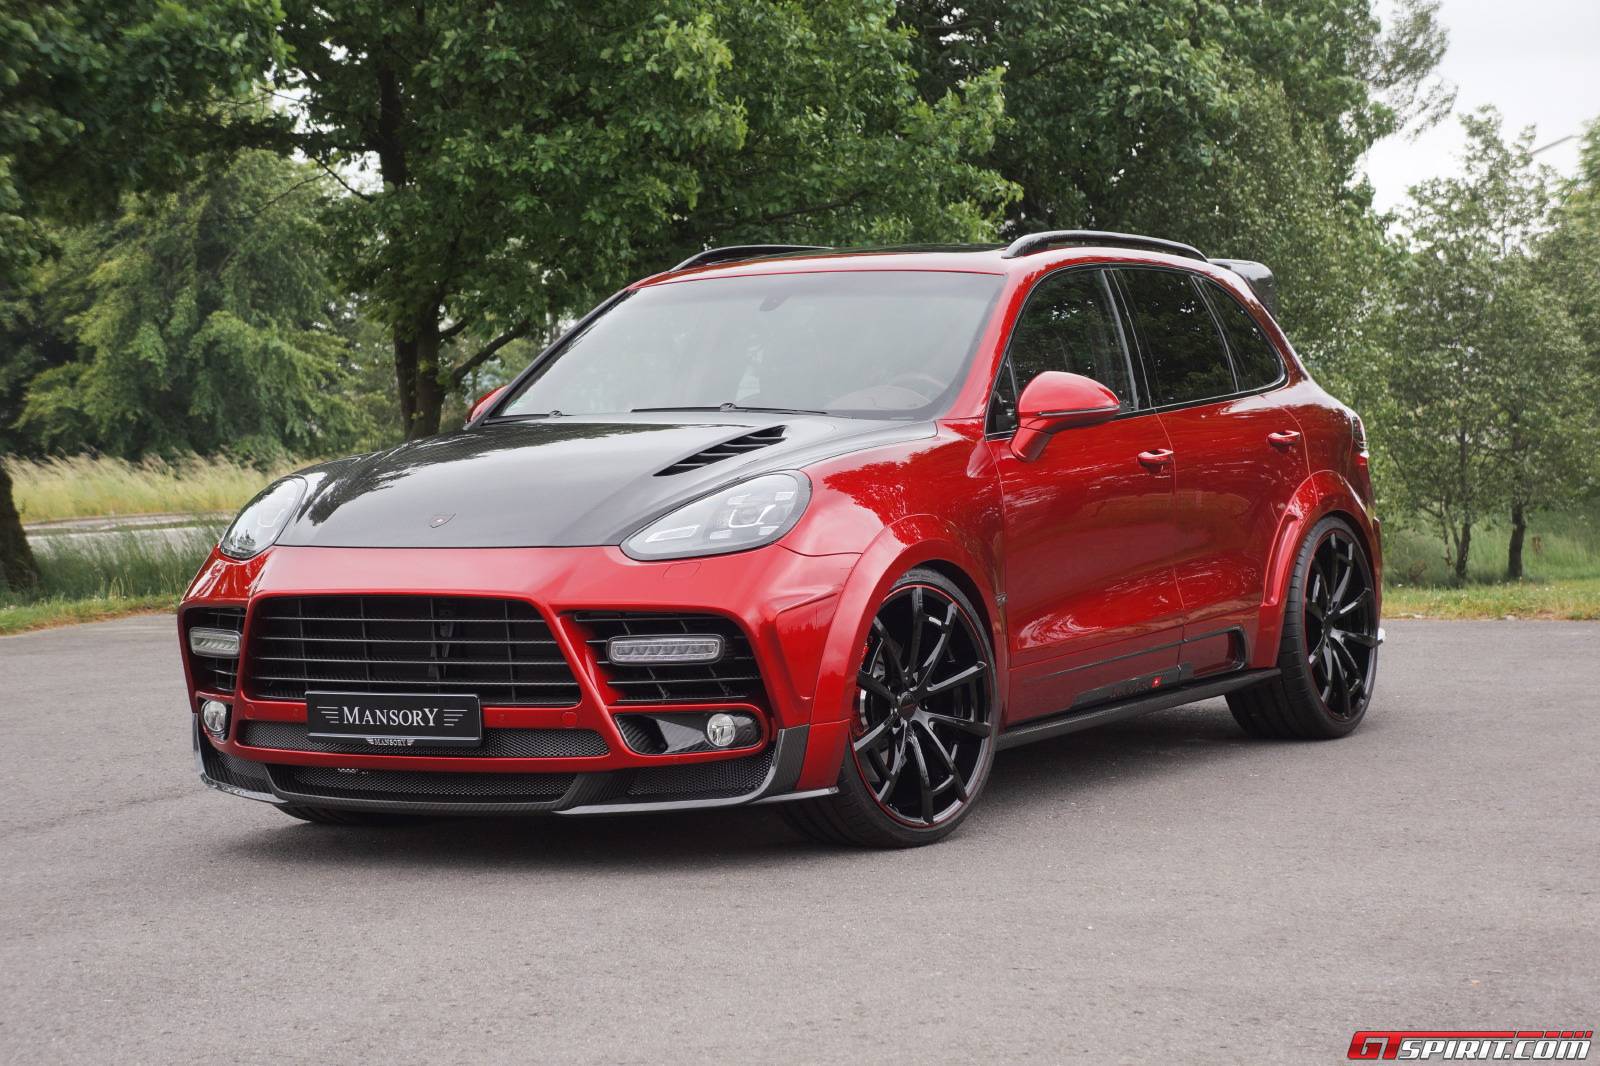  News Mansory Official: Mansory Porsche Cayenne Turbo and Turbo S